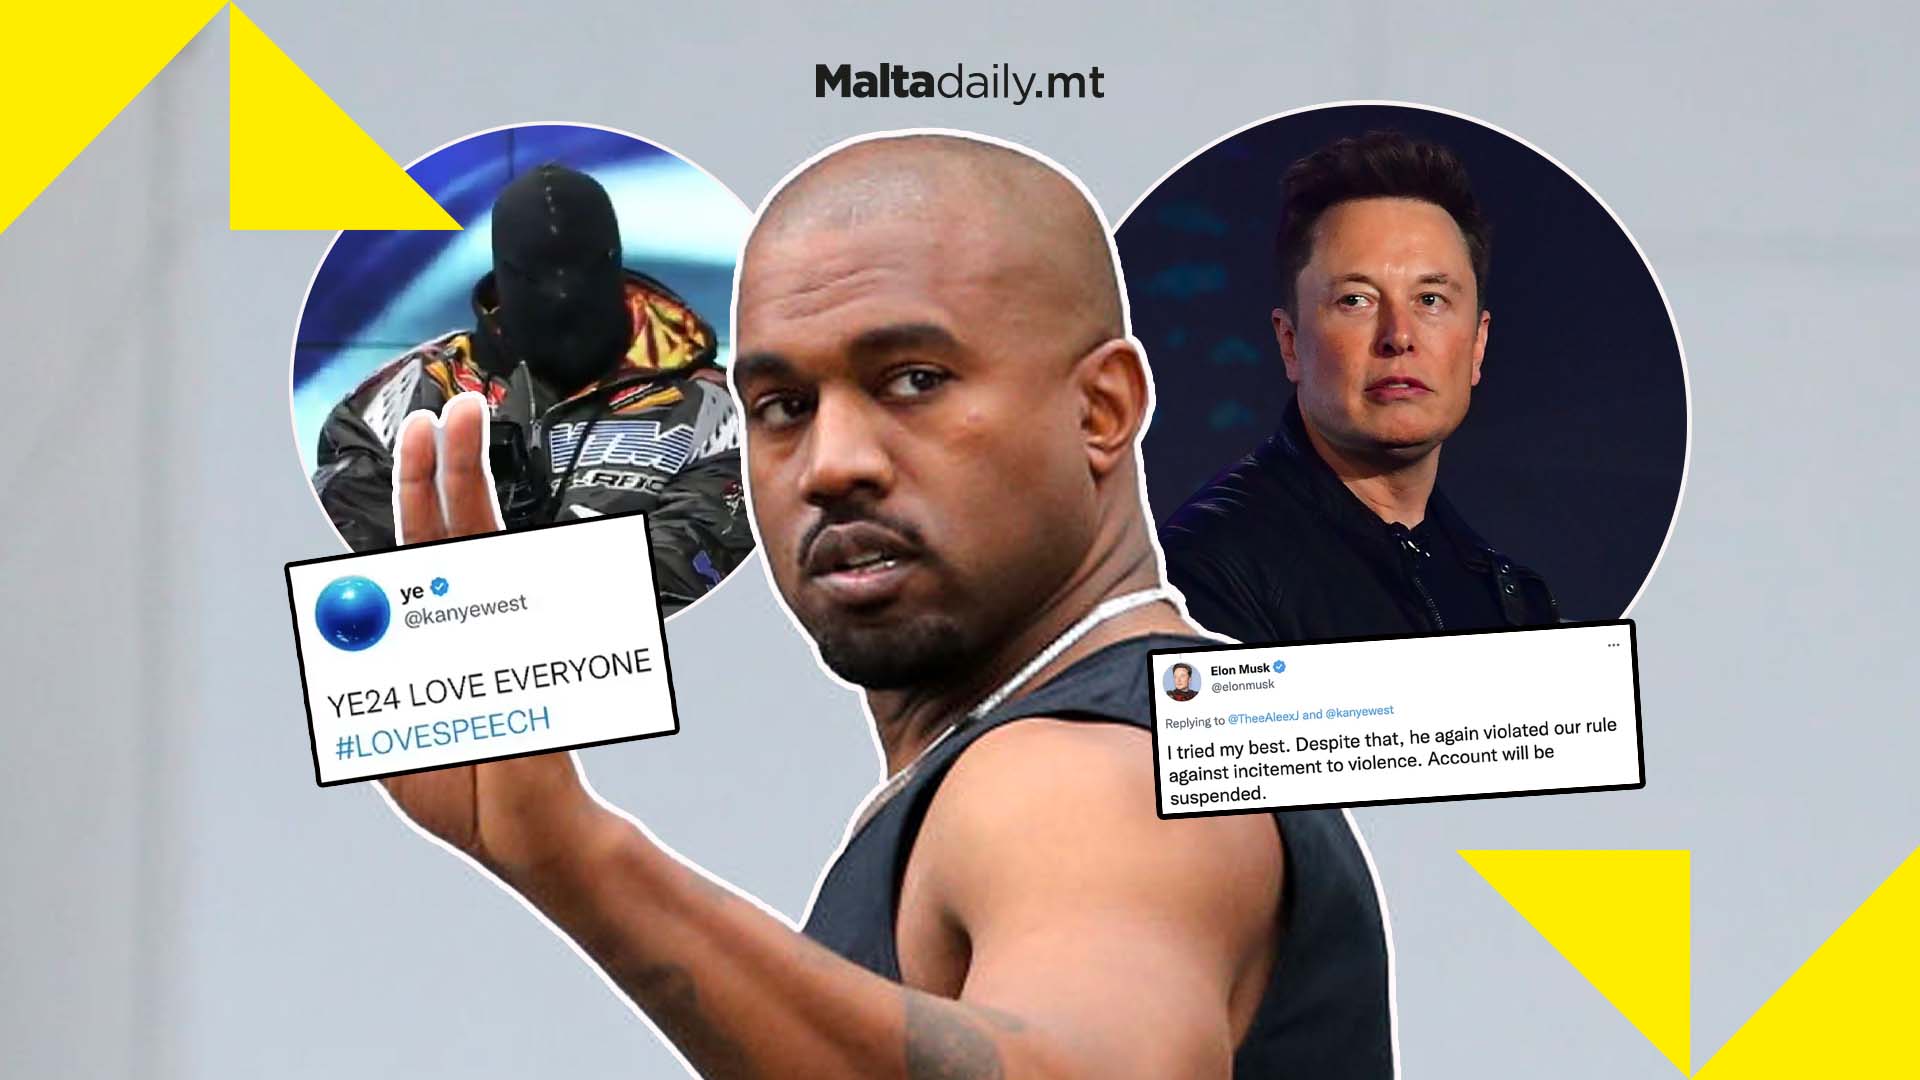 Kanye kicked off Twitter again after saying ‘I like Hitler’